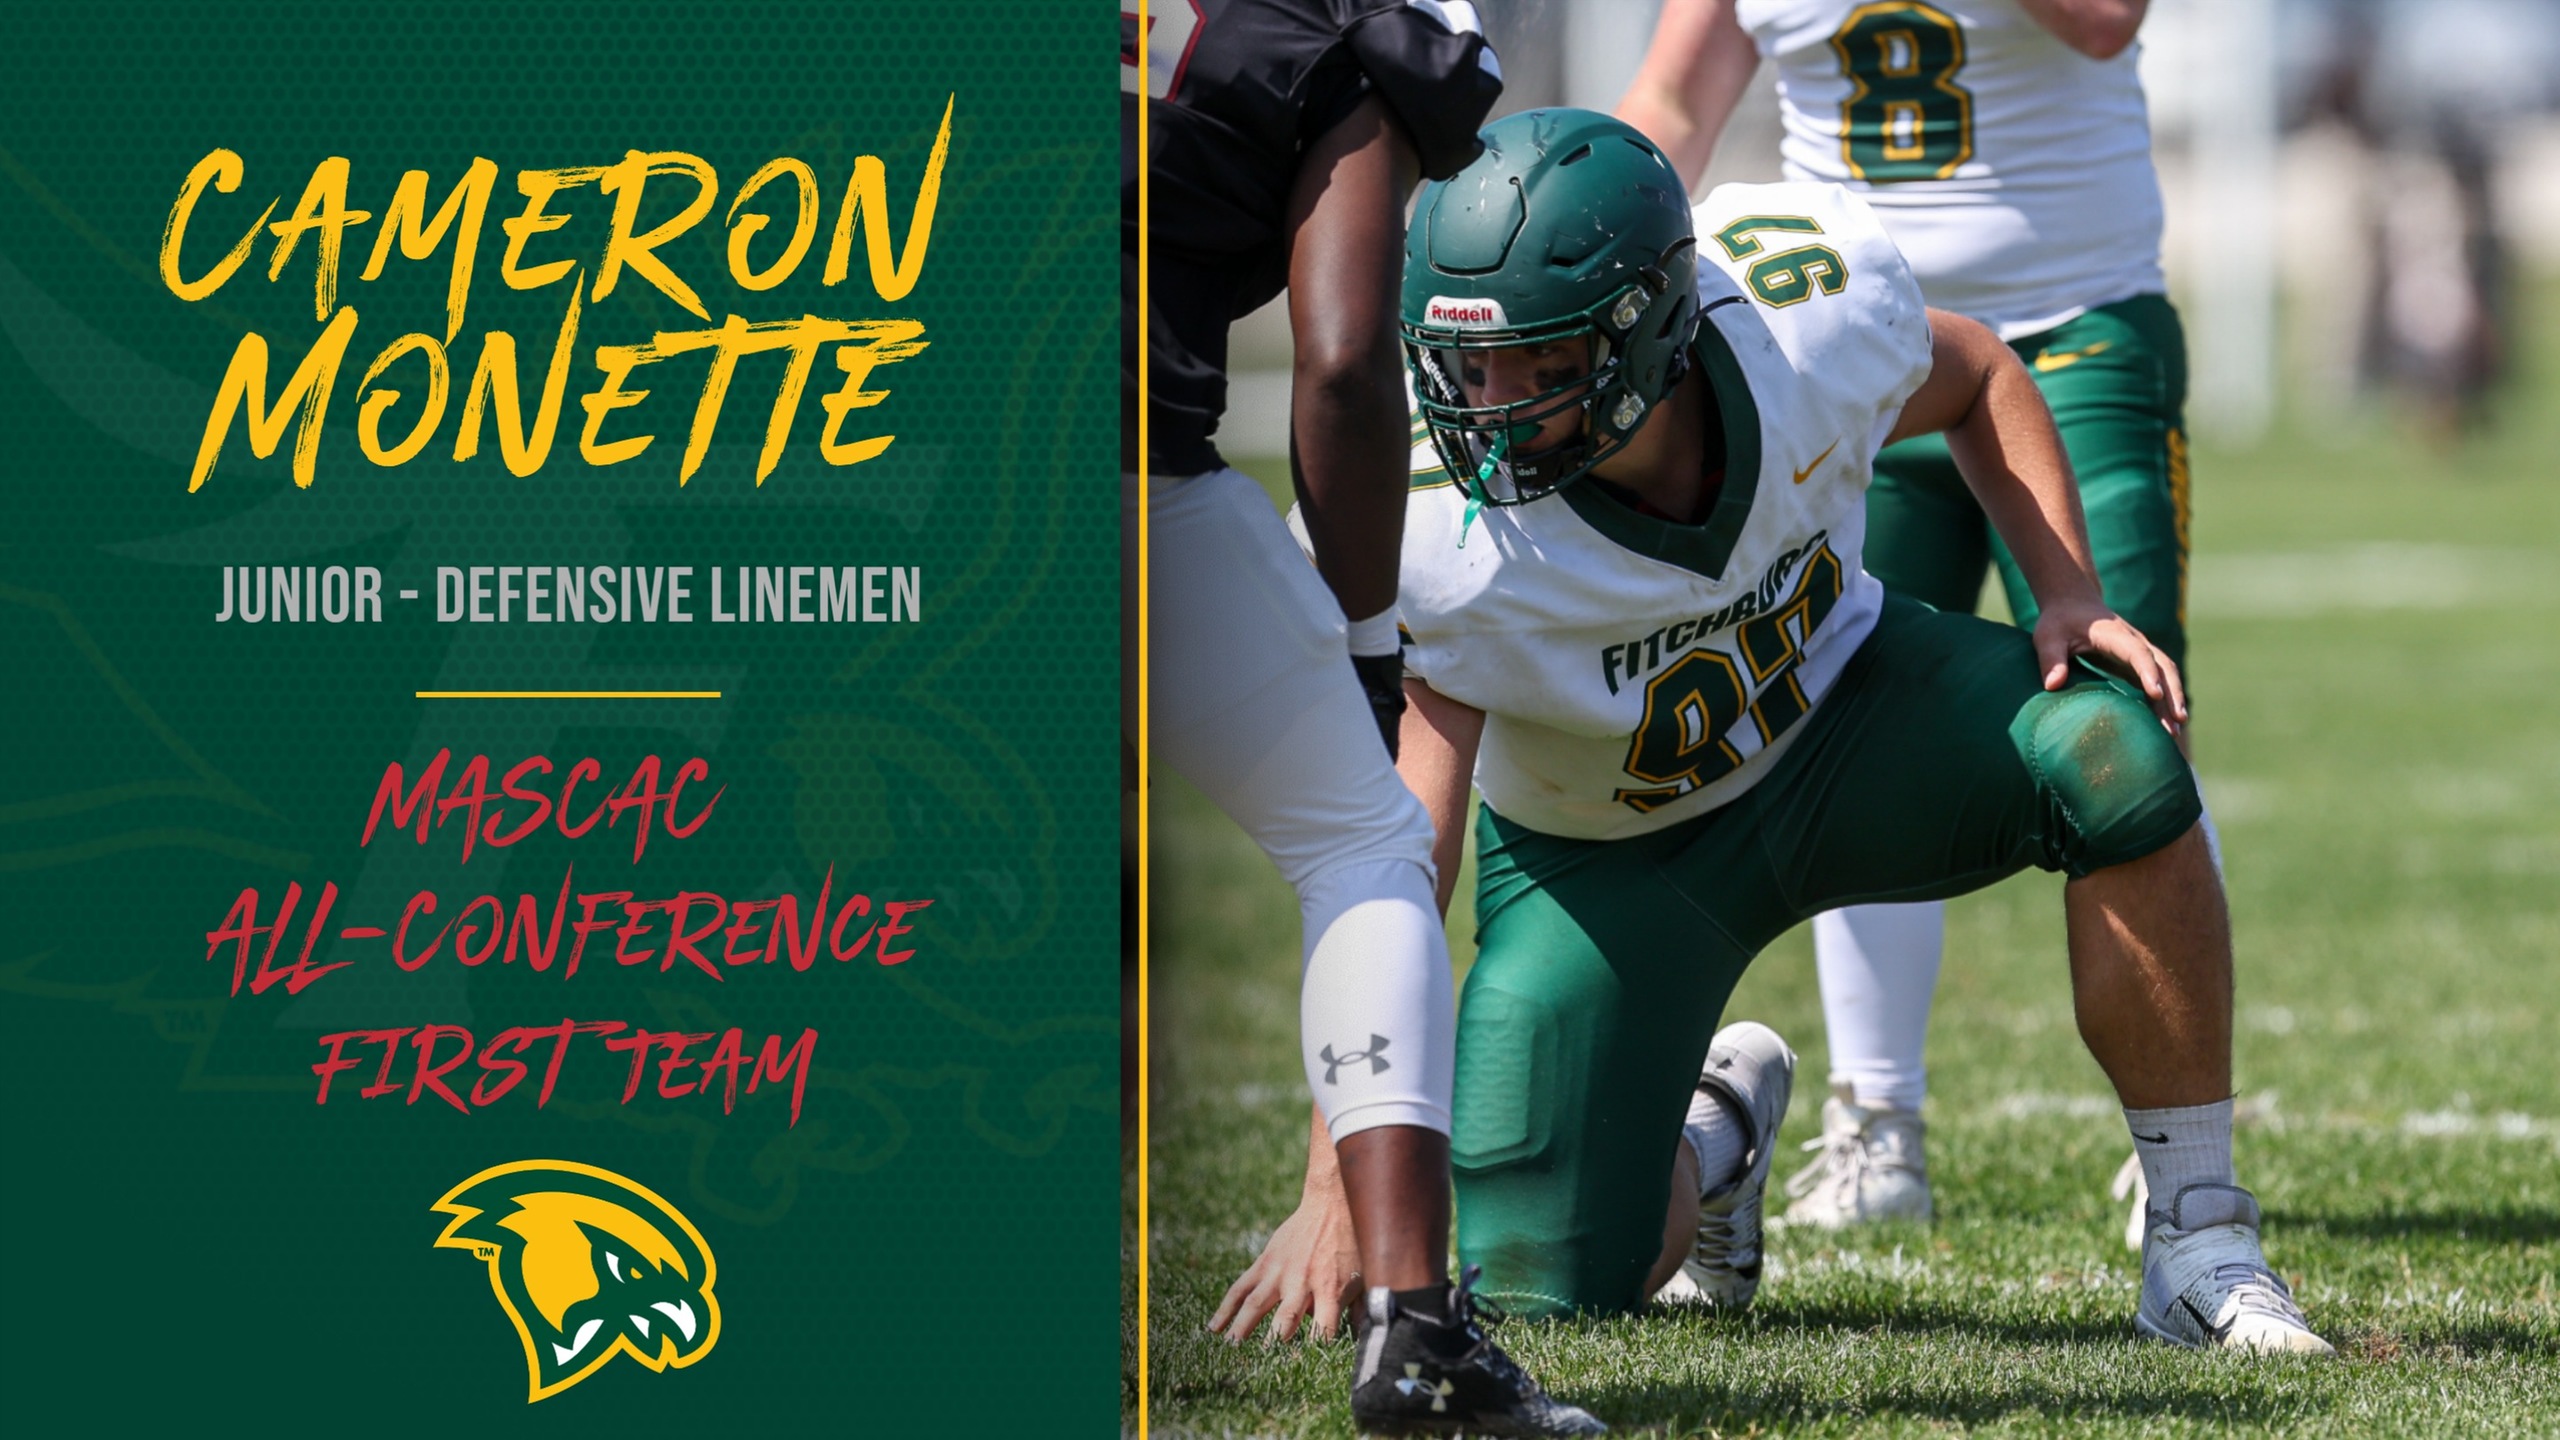 Monette Selected To All-Conference First Team